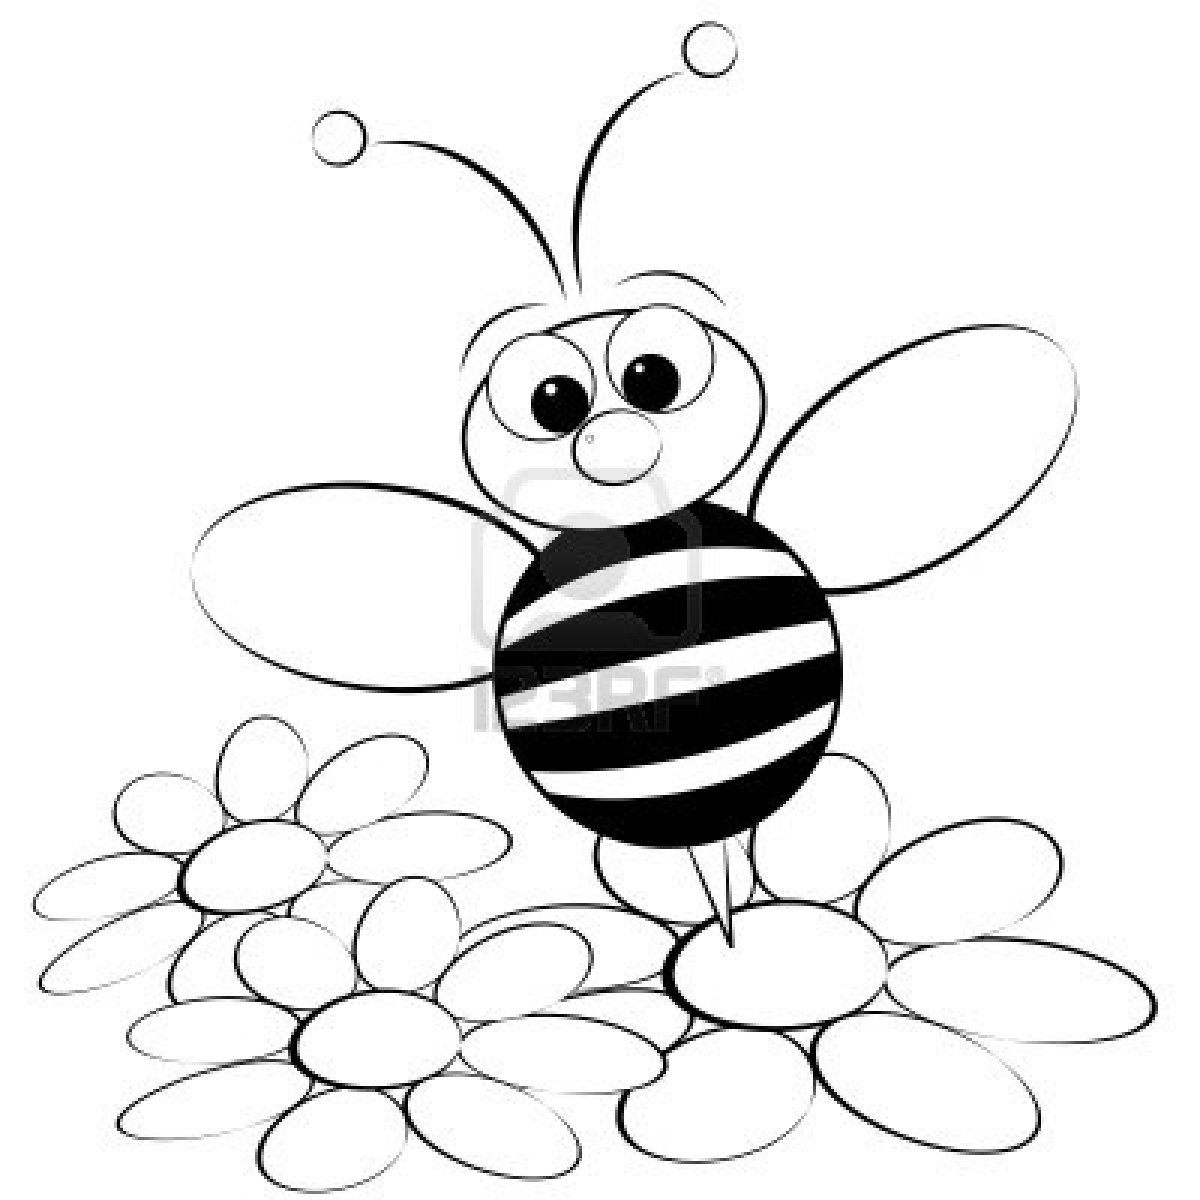 Ant coloring pages for kids - Coloring Pages & Pictures - IMAGIXS